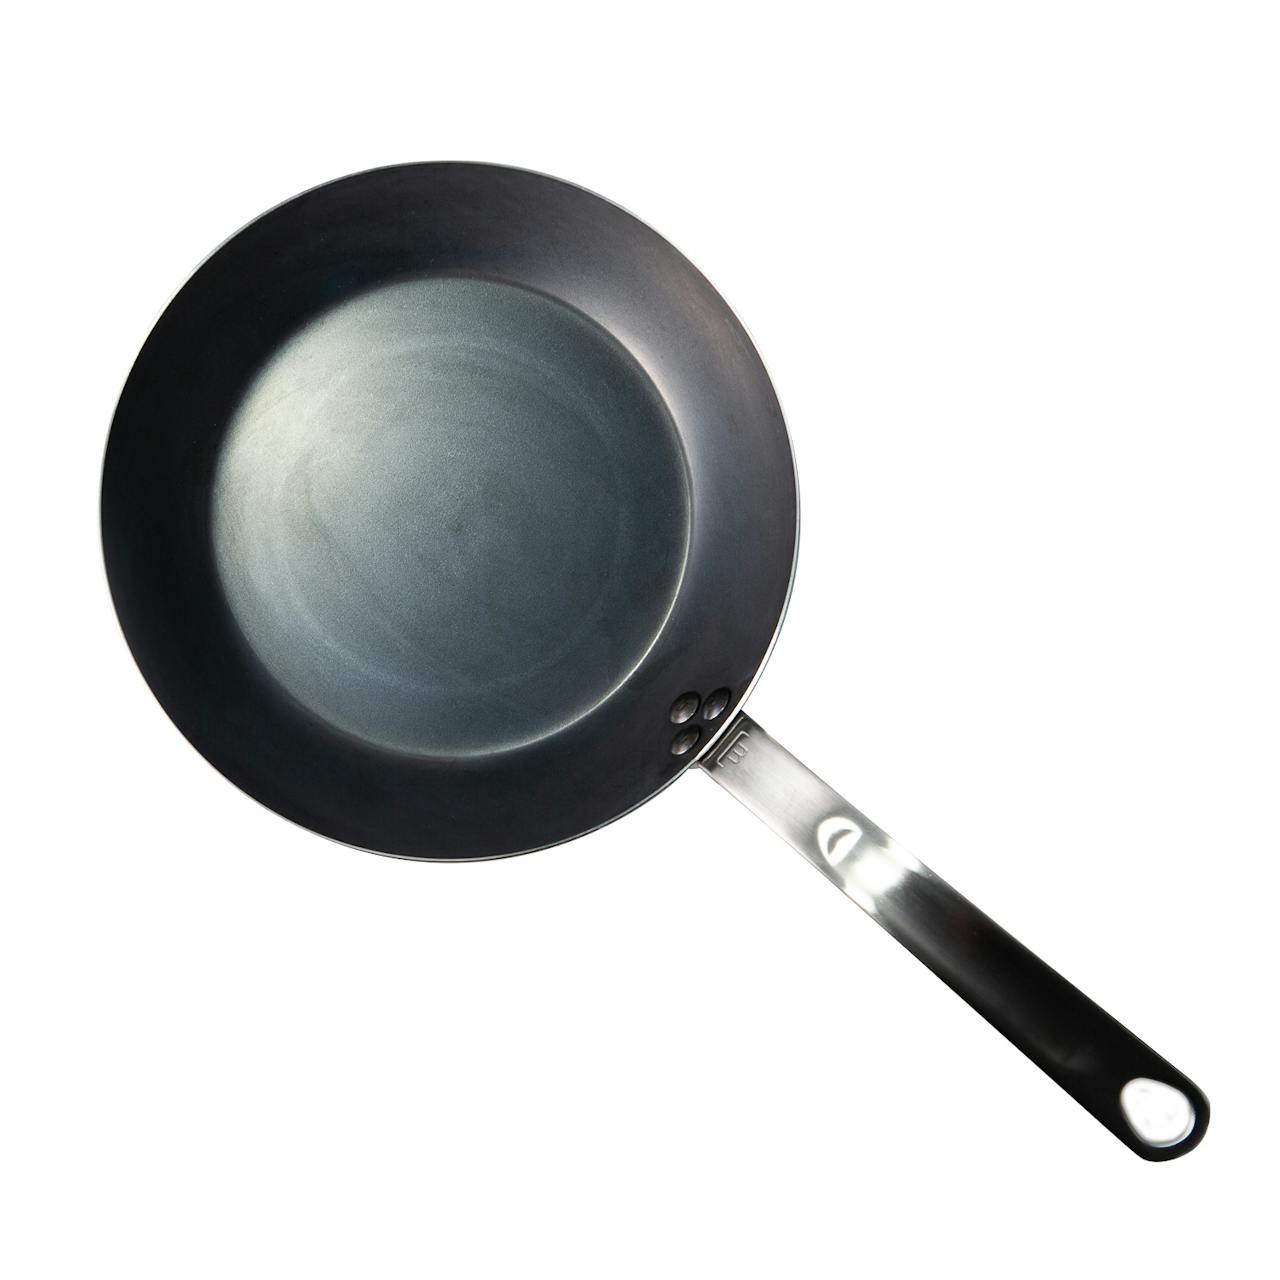 https://huckberry.imgix.net/spree/products/574721/original/PCjOit6llm_made-in_blue_carbon_steel_frying_pan_for-the-home-chef_0_original.jpg?auto=format%2C%20compress&crop=top&fit=clip&cs=tinysrgb&w=1280&ixlib=react-9.5.2&h=1280